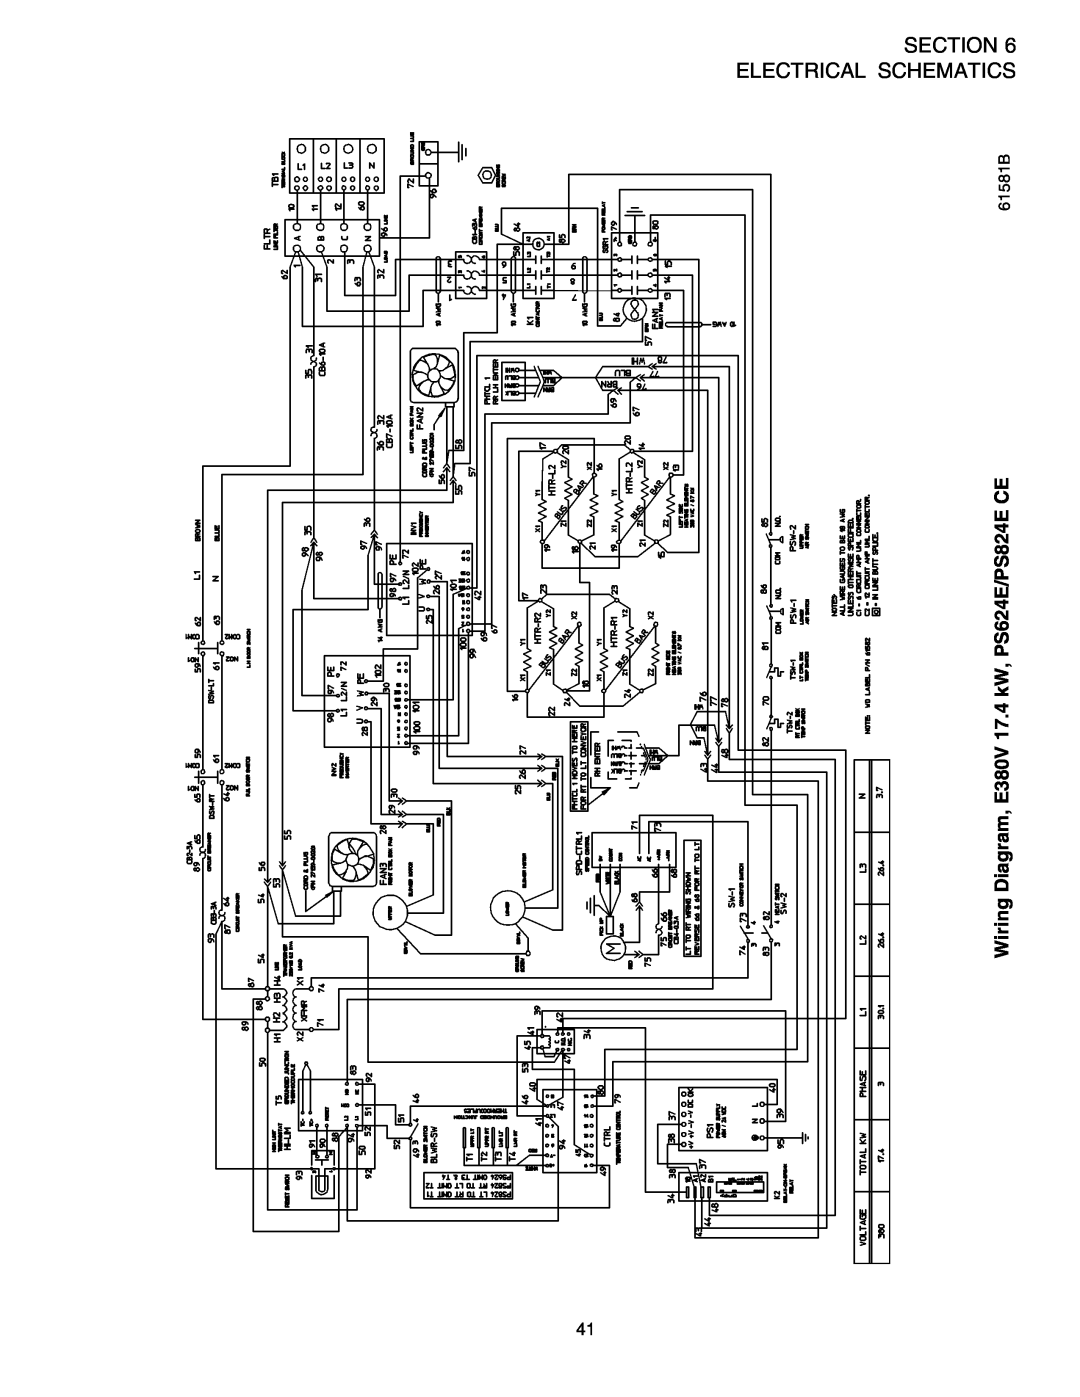 Middleby Marshall Section Electrical Schematics, Wiring Diagram, E380V 17.4 kW, PS624E/PS824E CE, 61581B 